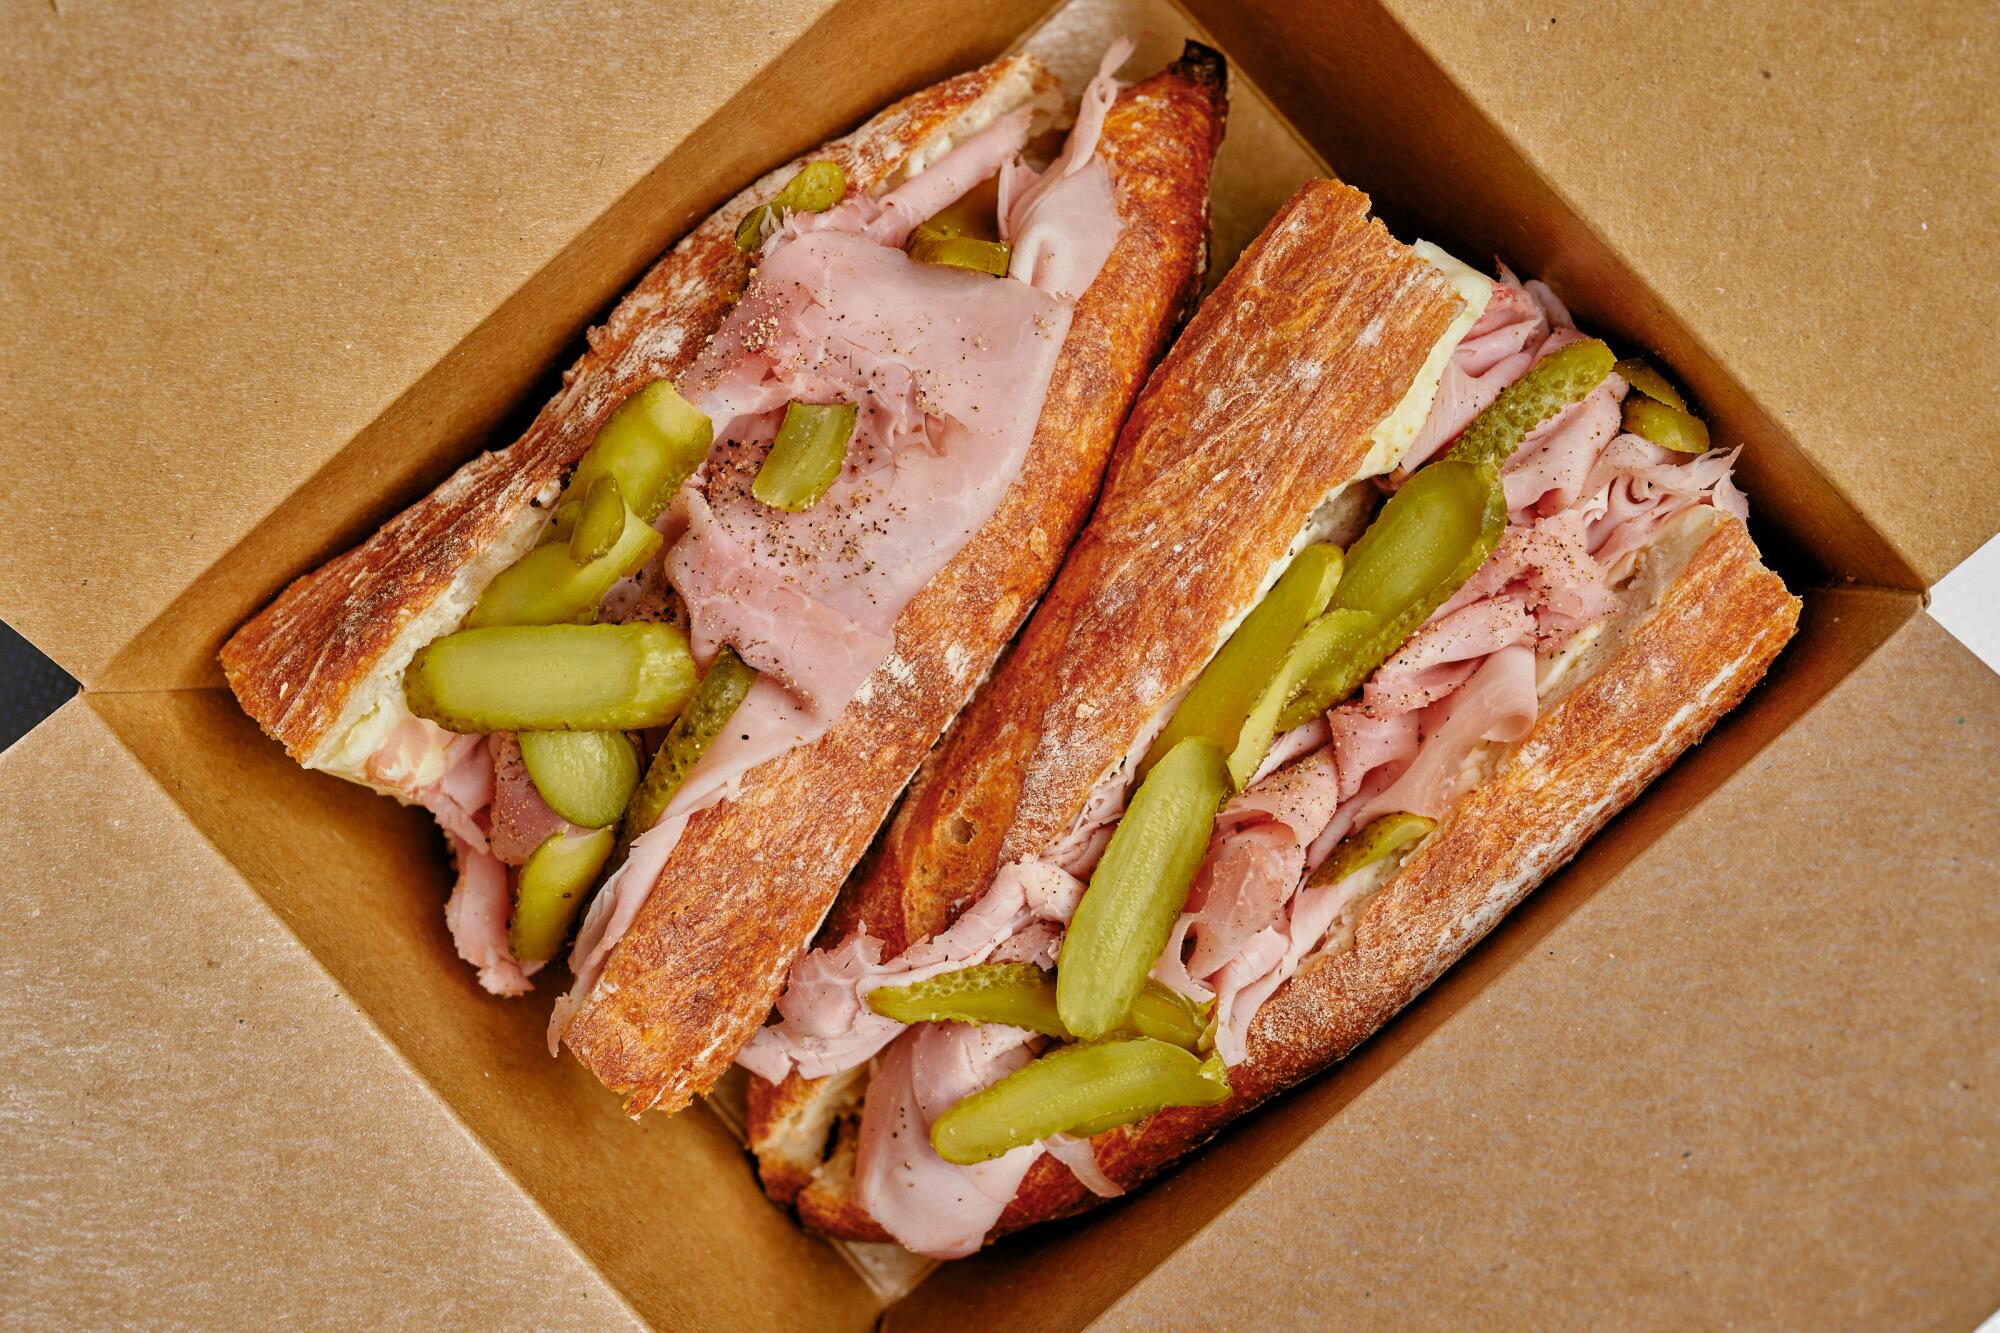 A jambon beurre sandwich on a baguette, cut in half and seen from overhead in a cardboard box